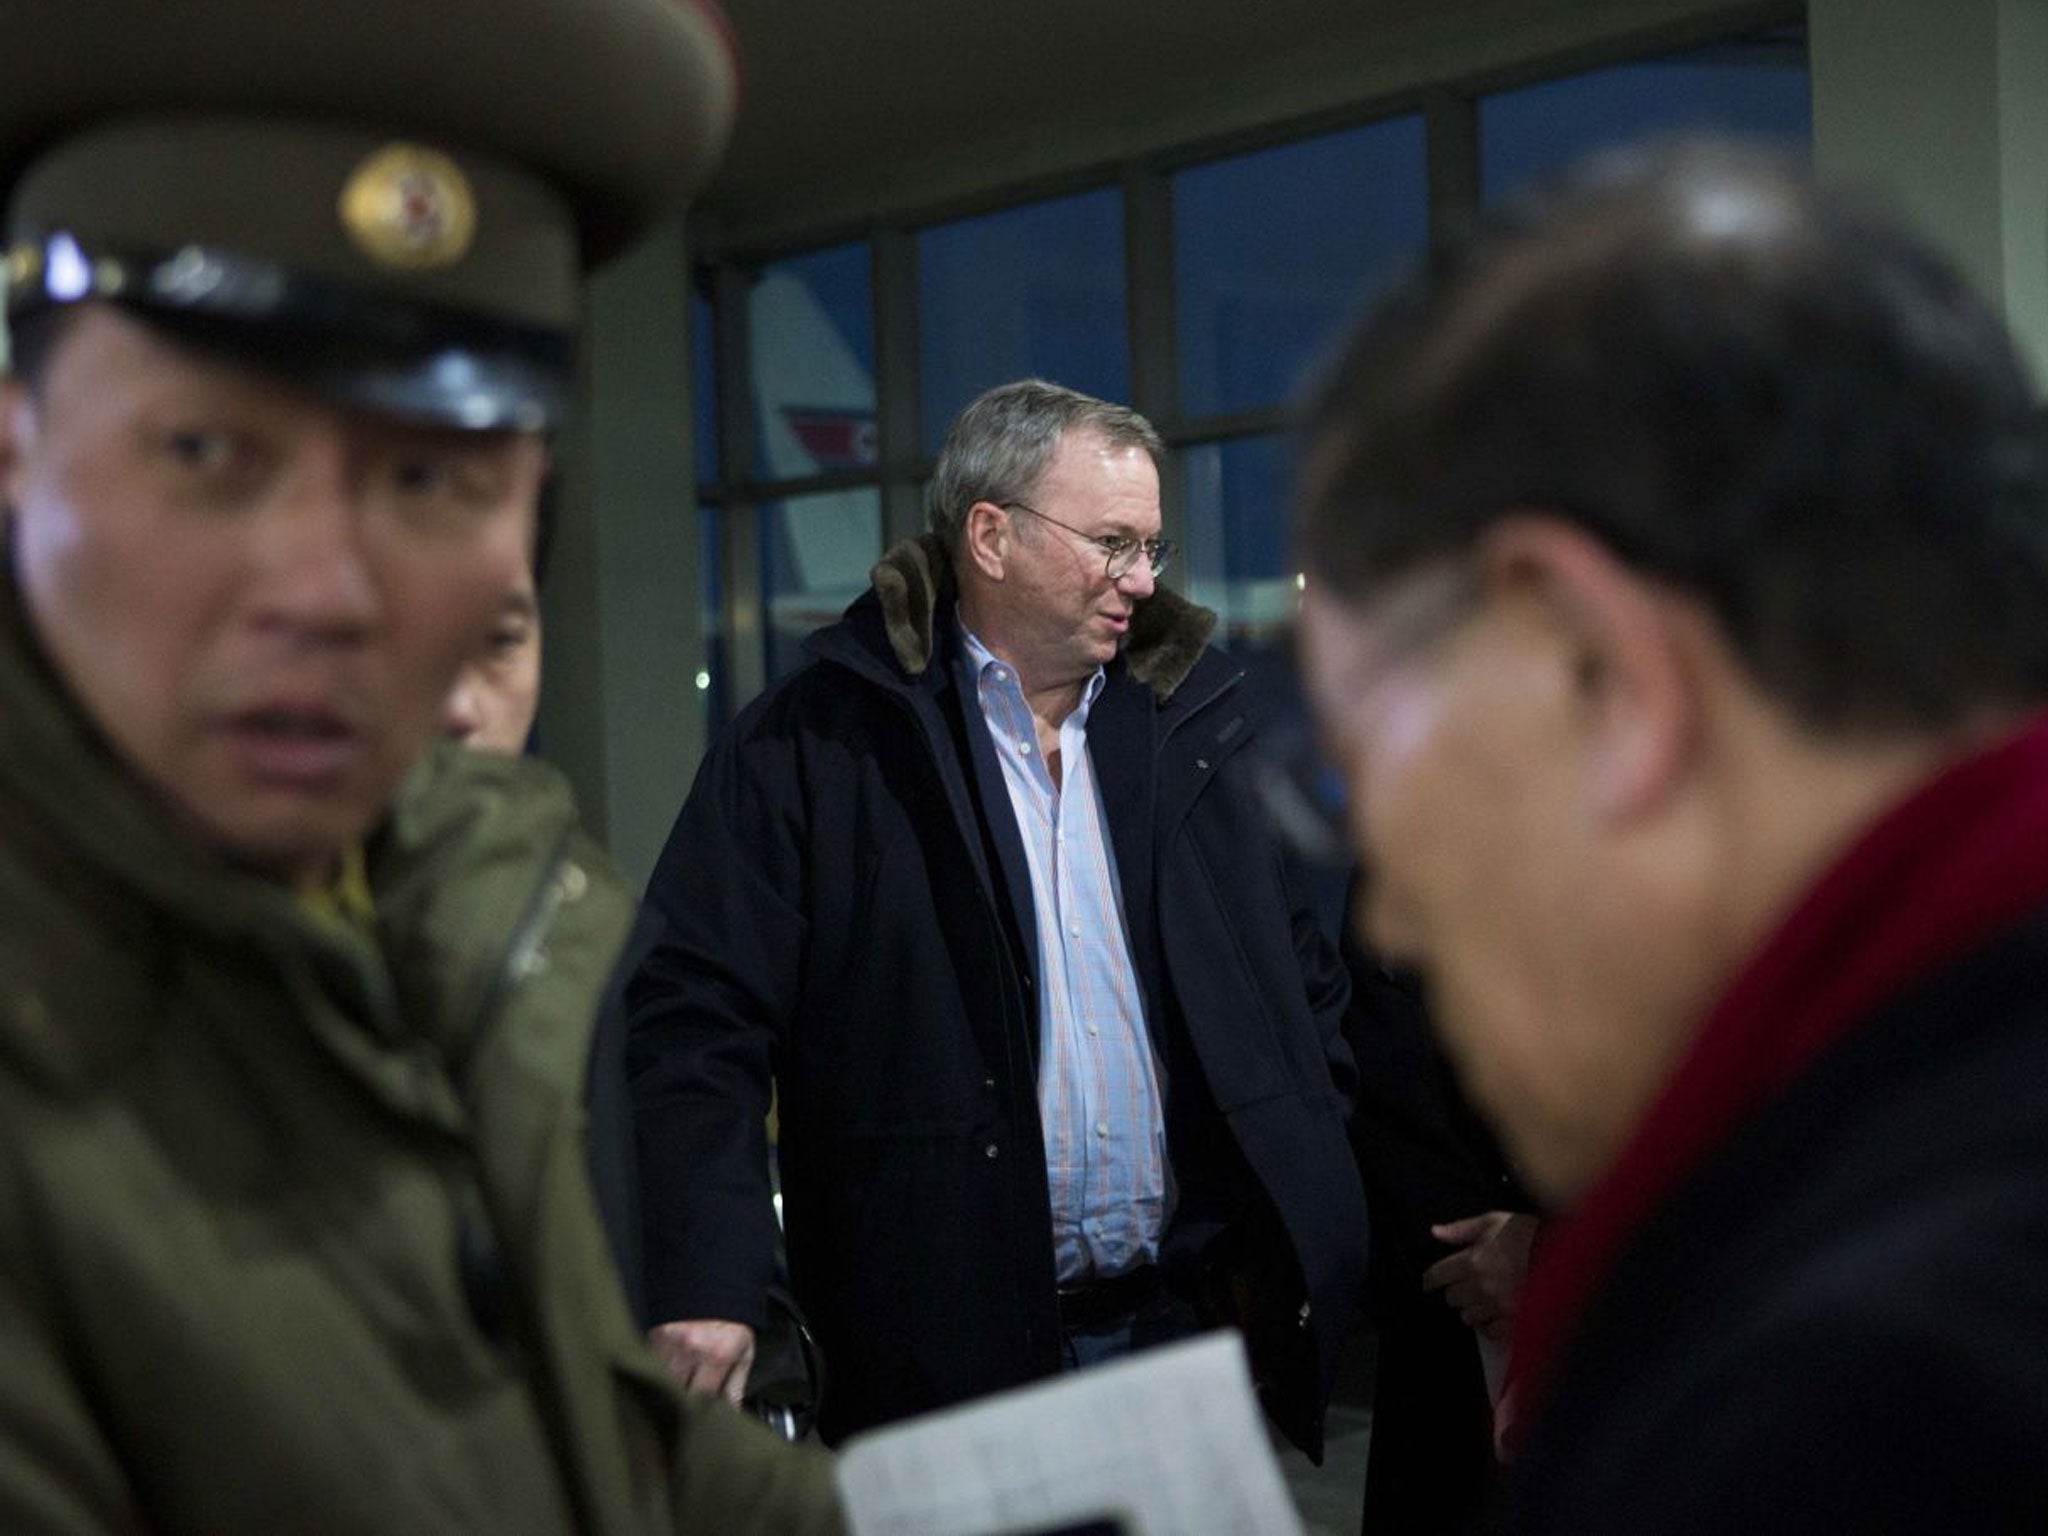 The Google chairman Eric Schmidt arrived in North Korea yesterday saying he wanted a first-hand look at the country’s economy and media